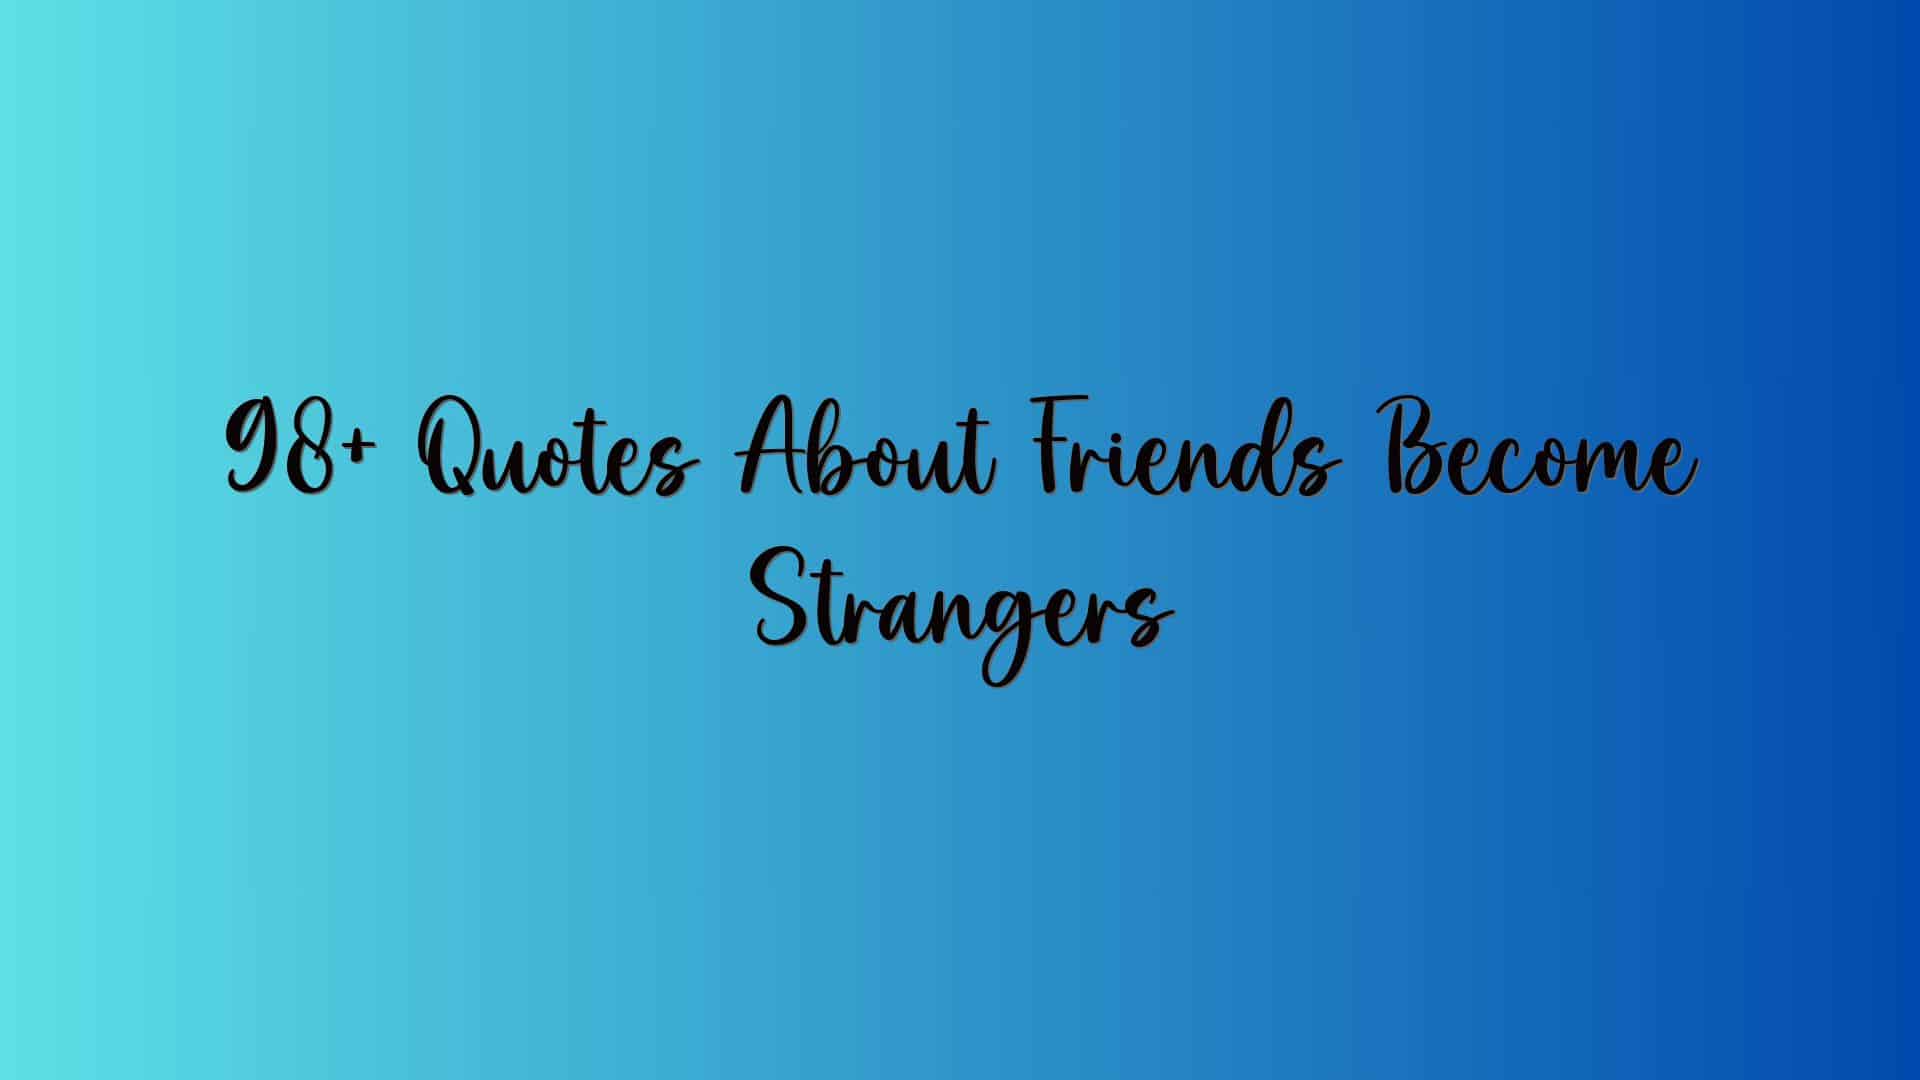 98+ Quotes About Friends Become Strangers